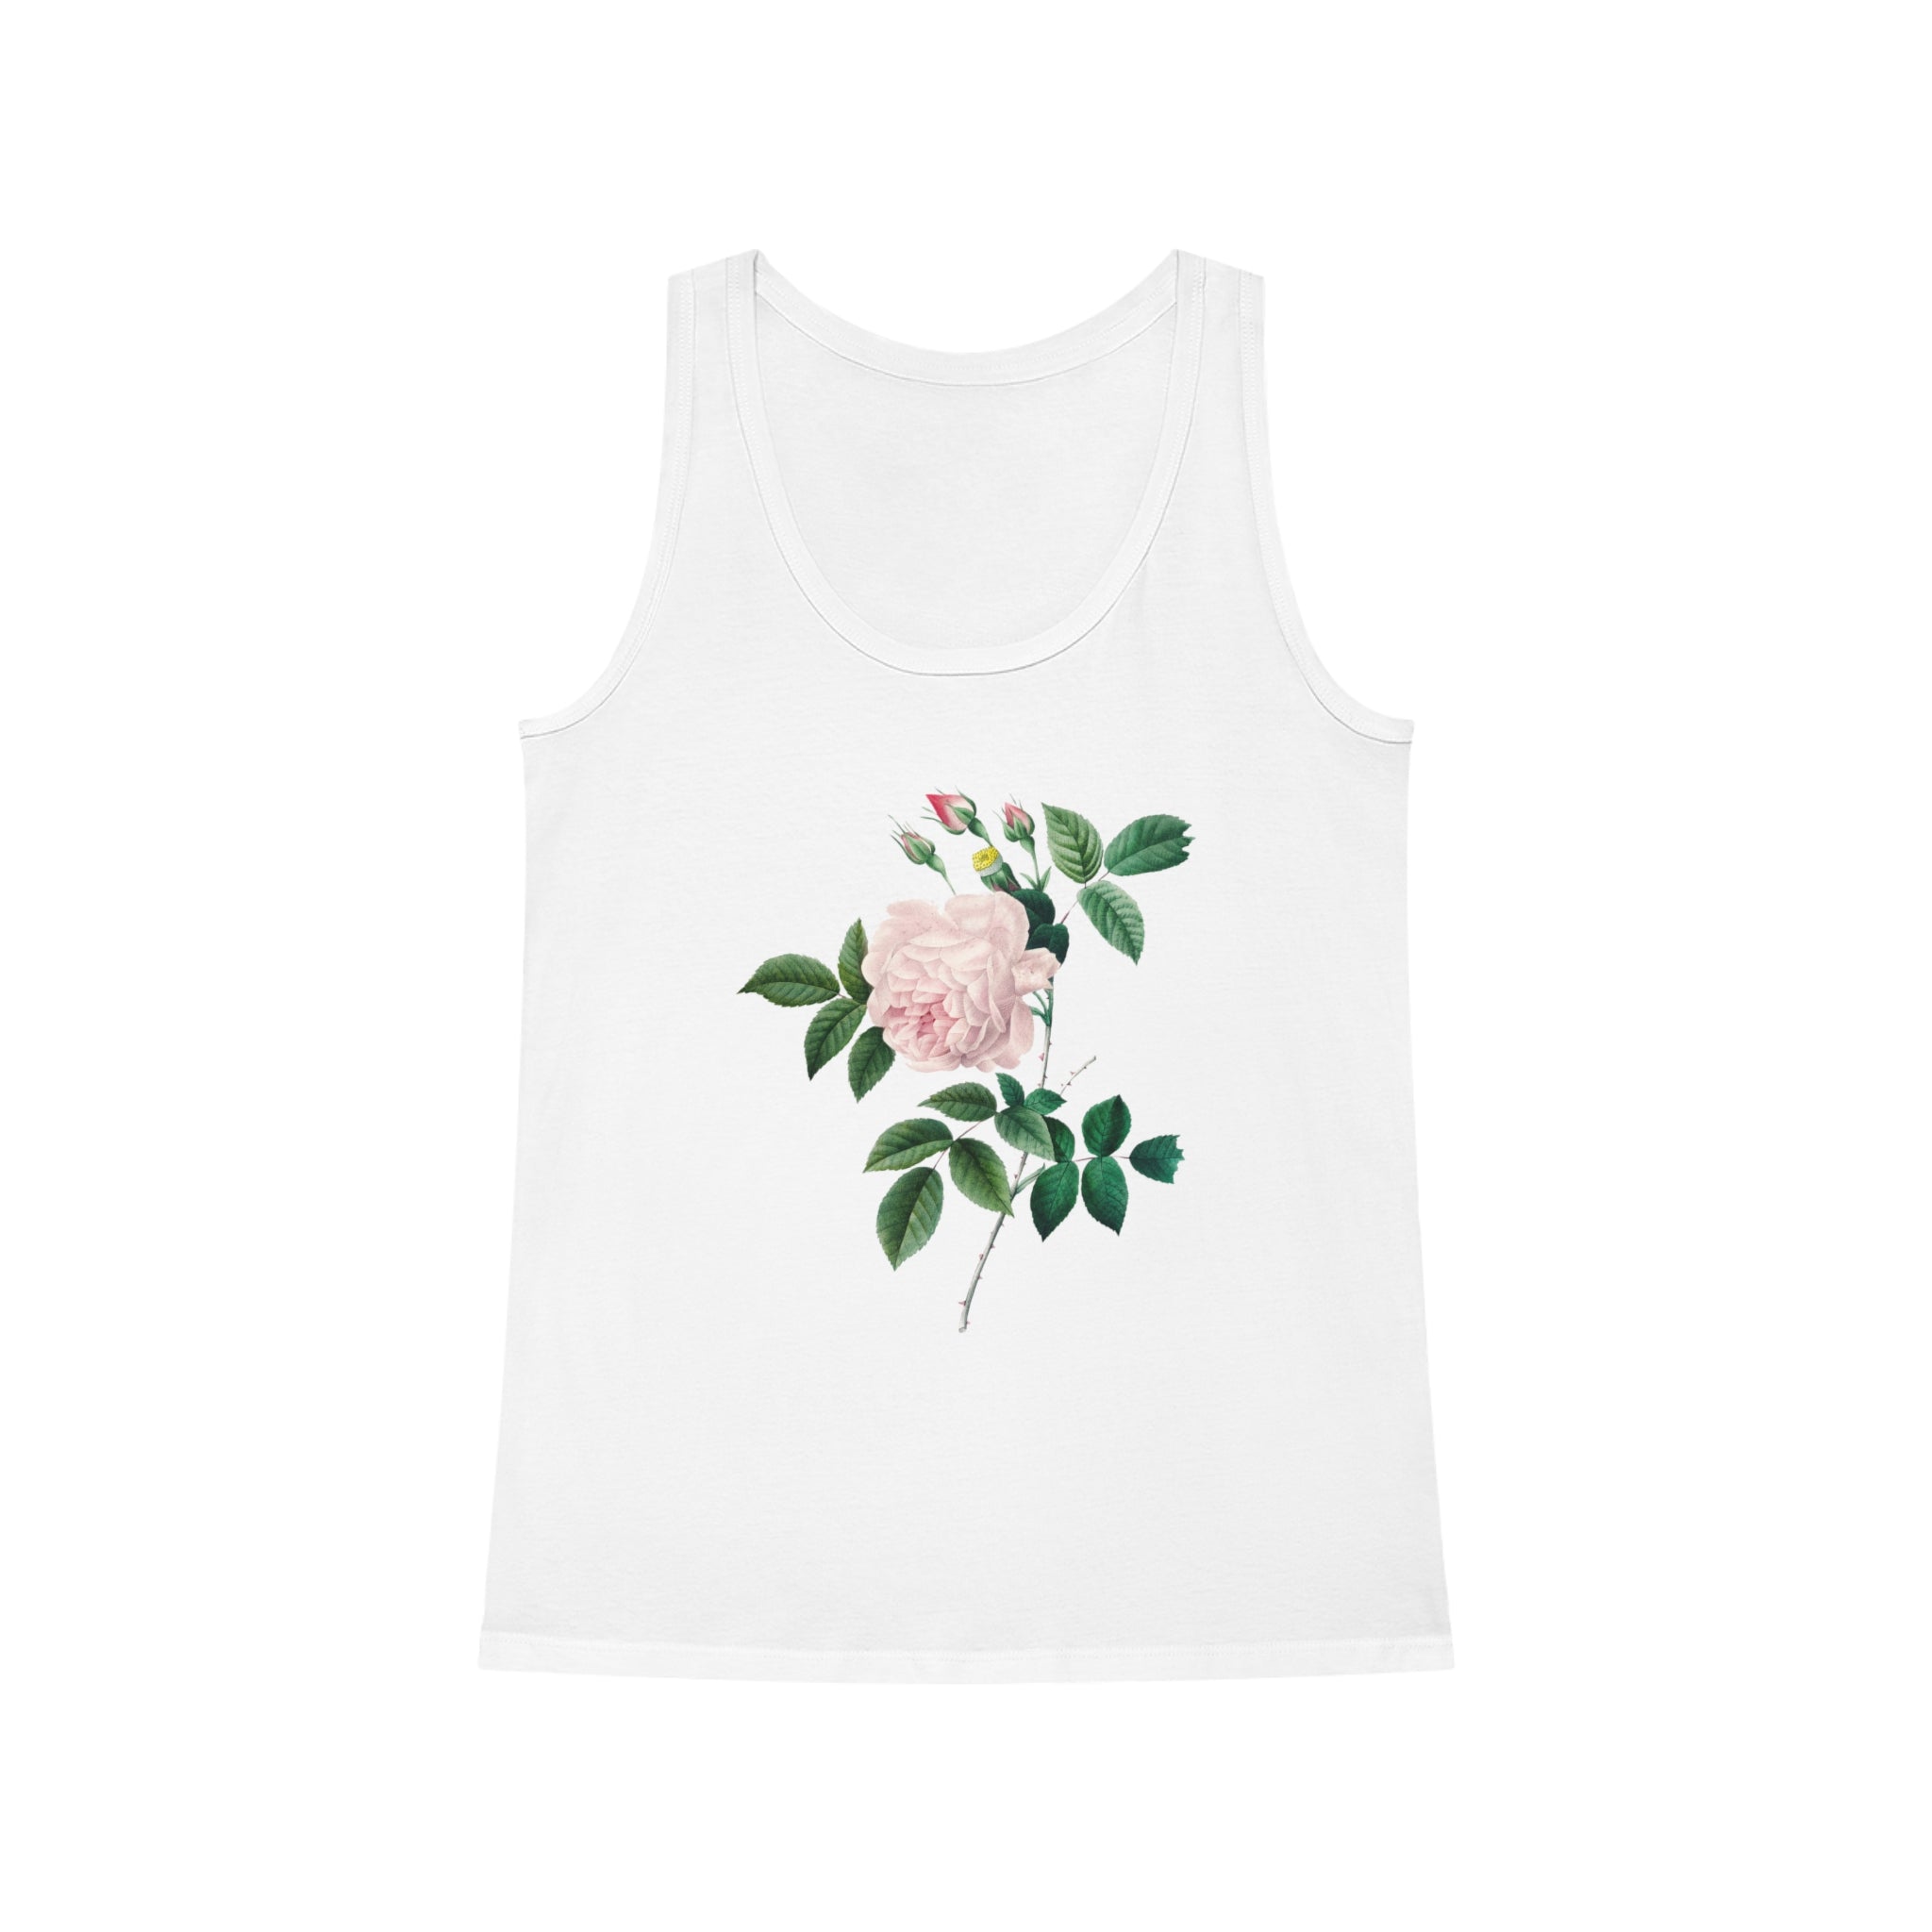 Introducing our Rose Tank Top, designed for women who prioritize both style and comfort in their yoga practice. Crafted from organic cotton, this tank top features a delicate pink rose motif that adds